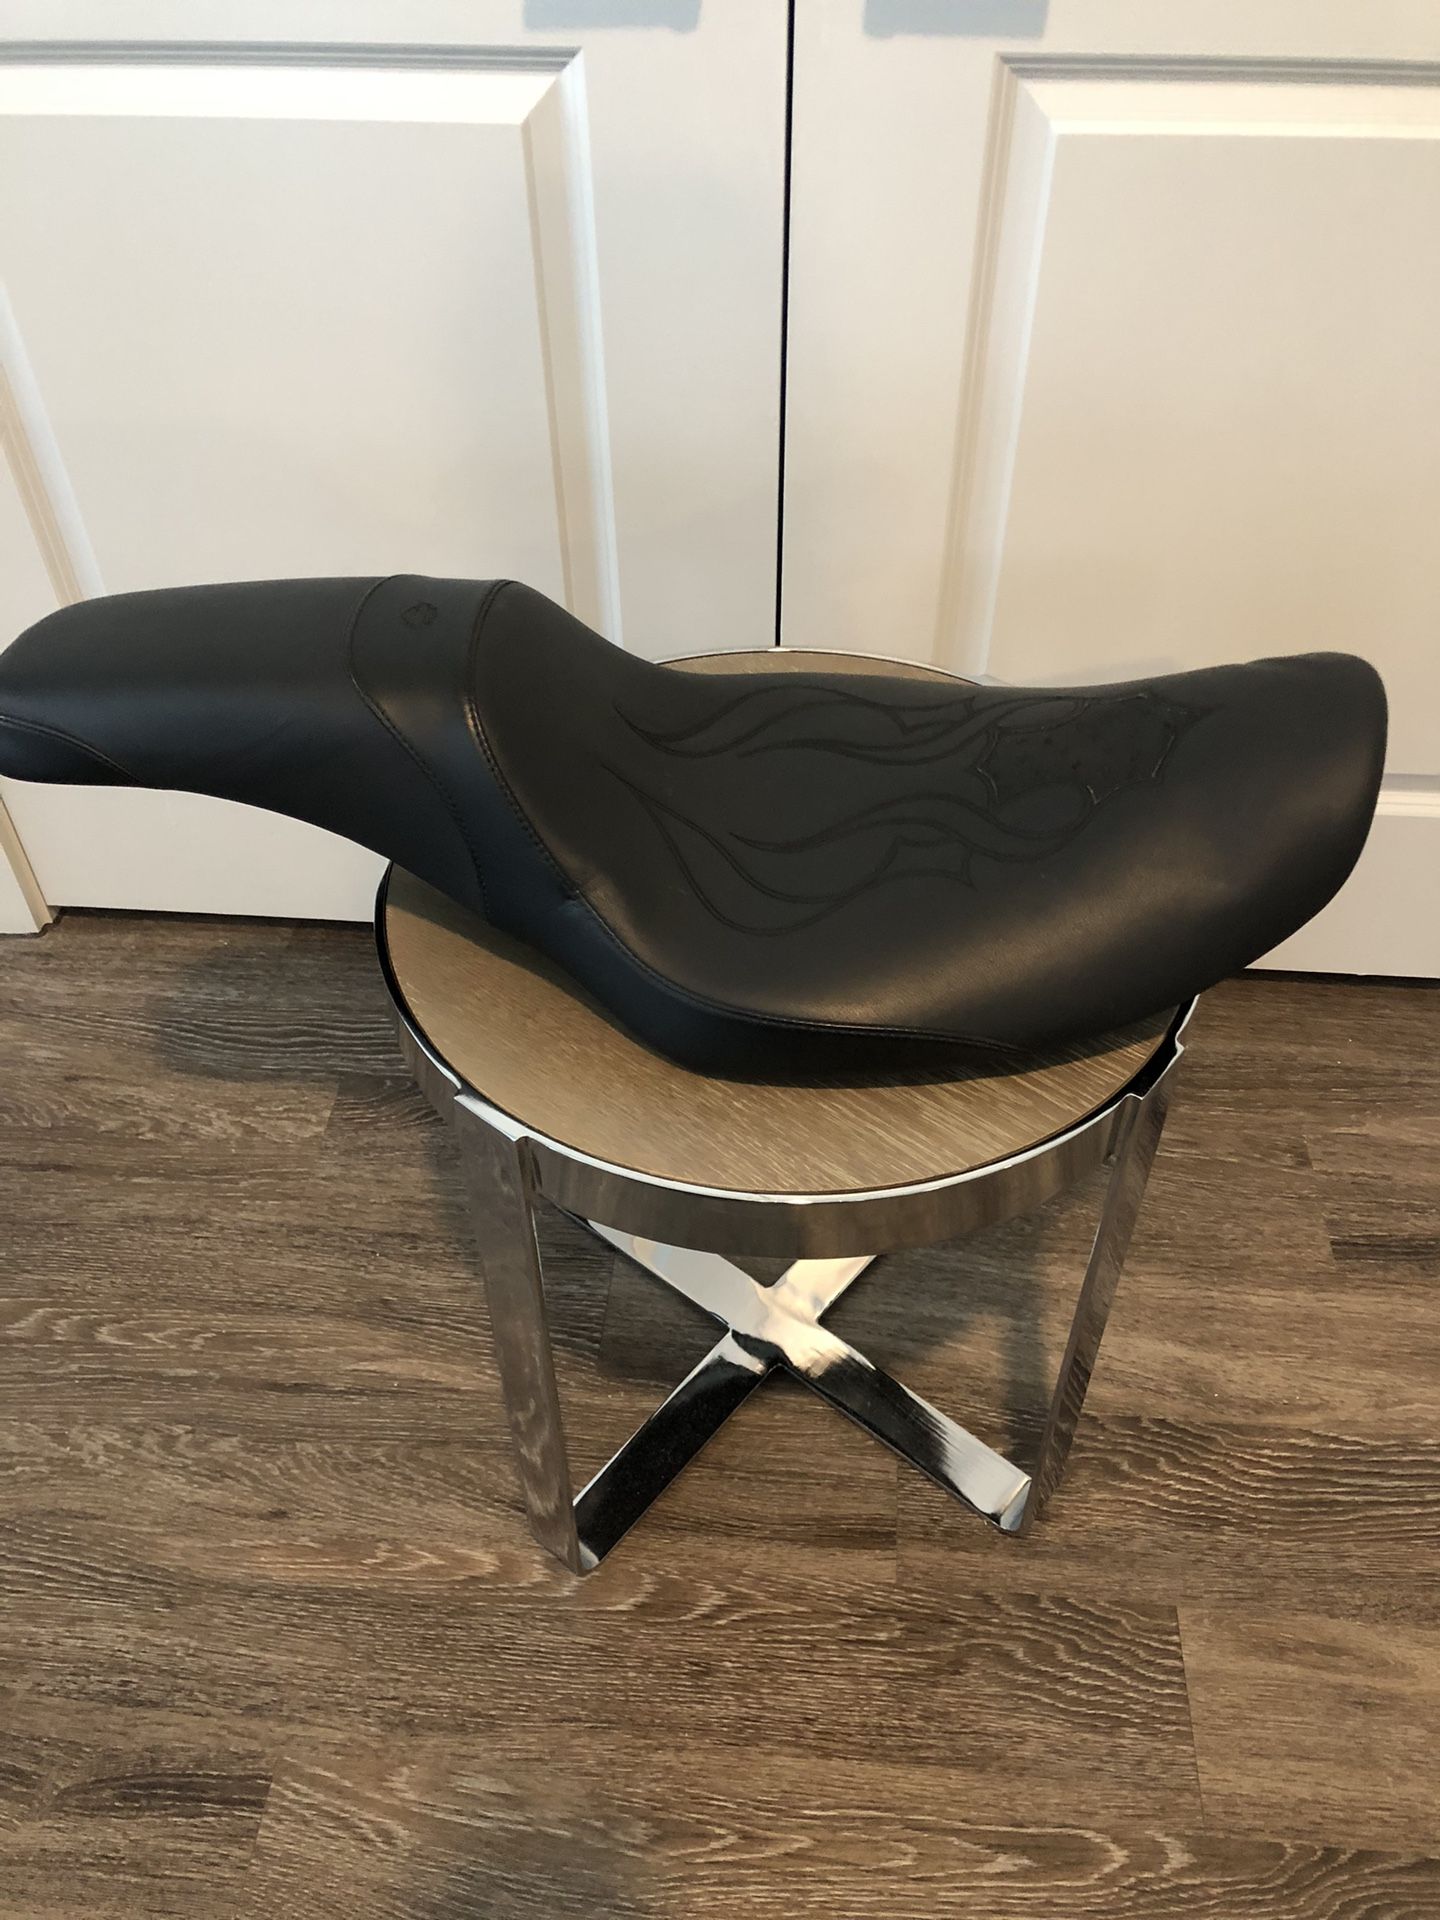 Harley Davidson Dyna Custom Seat With Ostrich Insert. Excellent Condition.